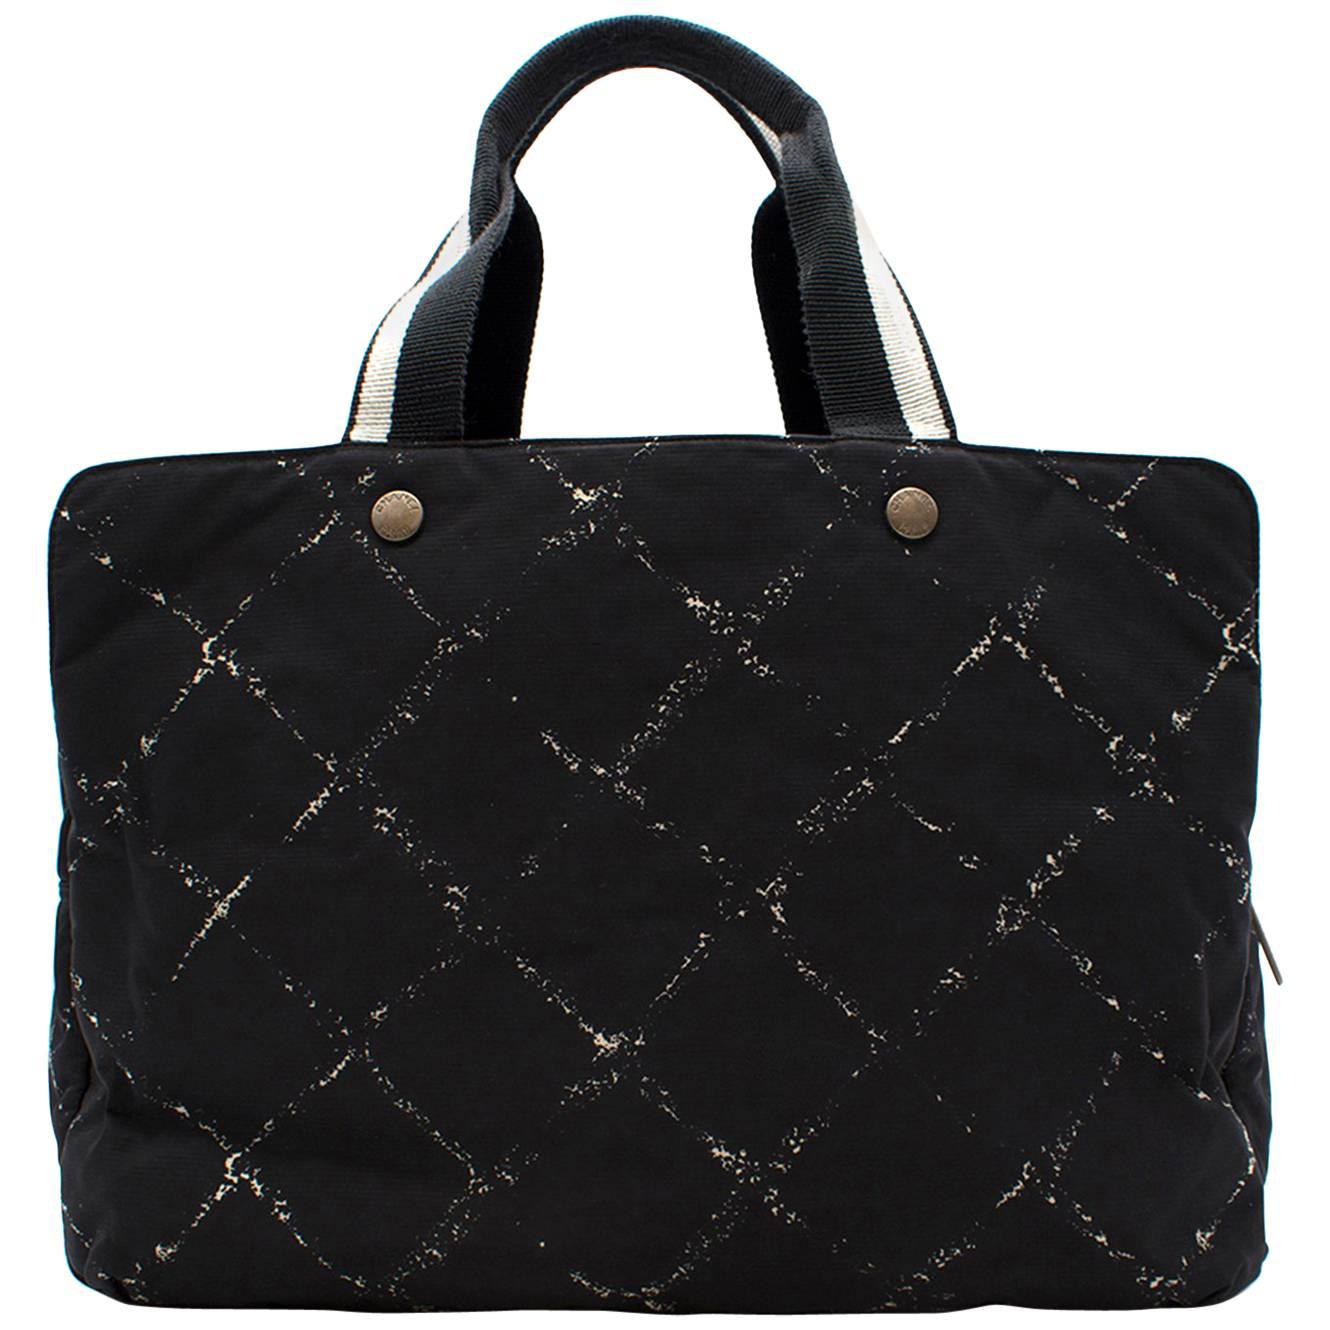 Chanel Black Criss Cross Large Tote Duffle Bag For Sale